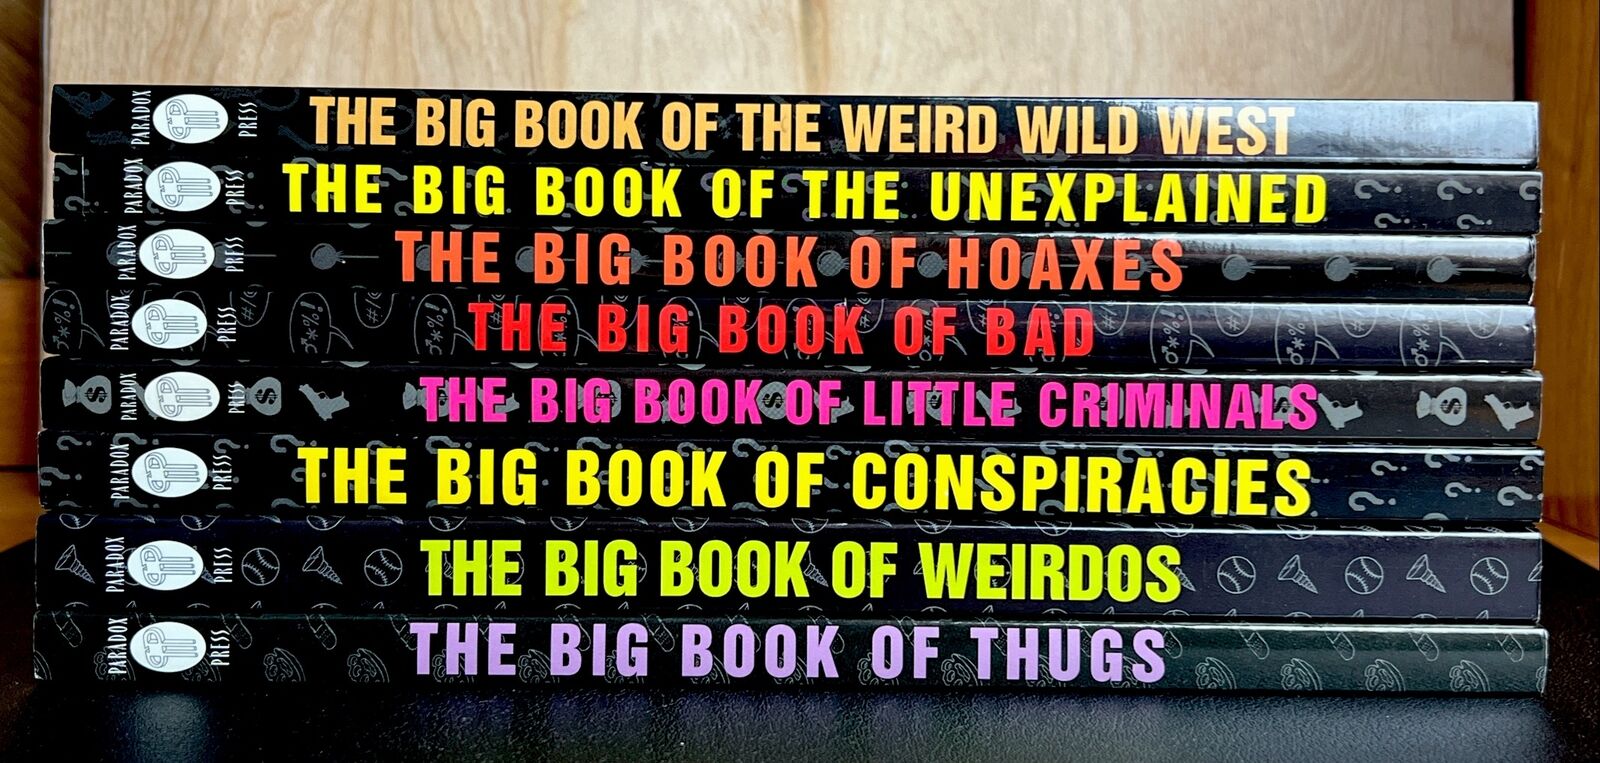 LOT 8 The Big Book Of (Factoid Books) Comic Books Paradox west weirdos Hoaxes